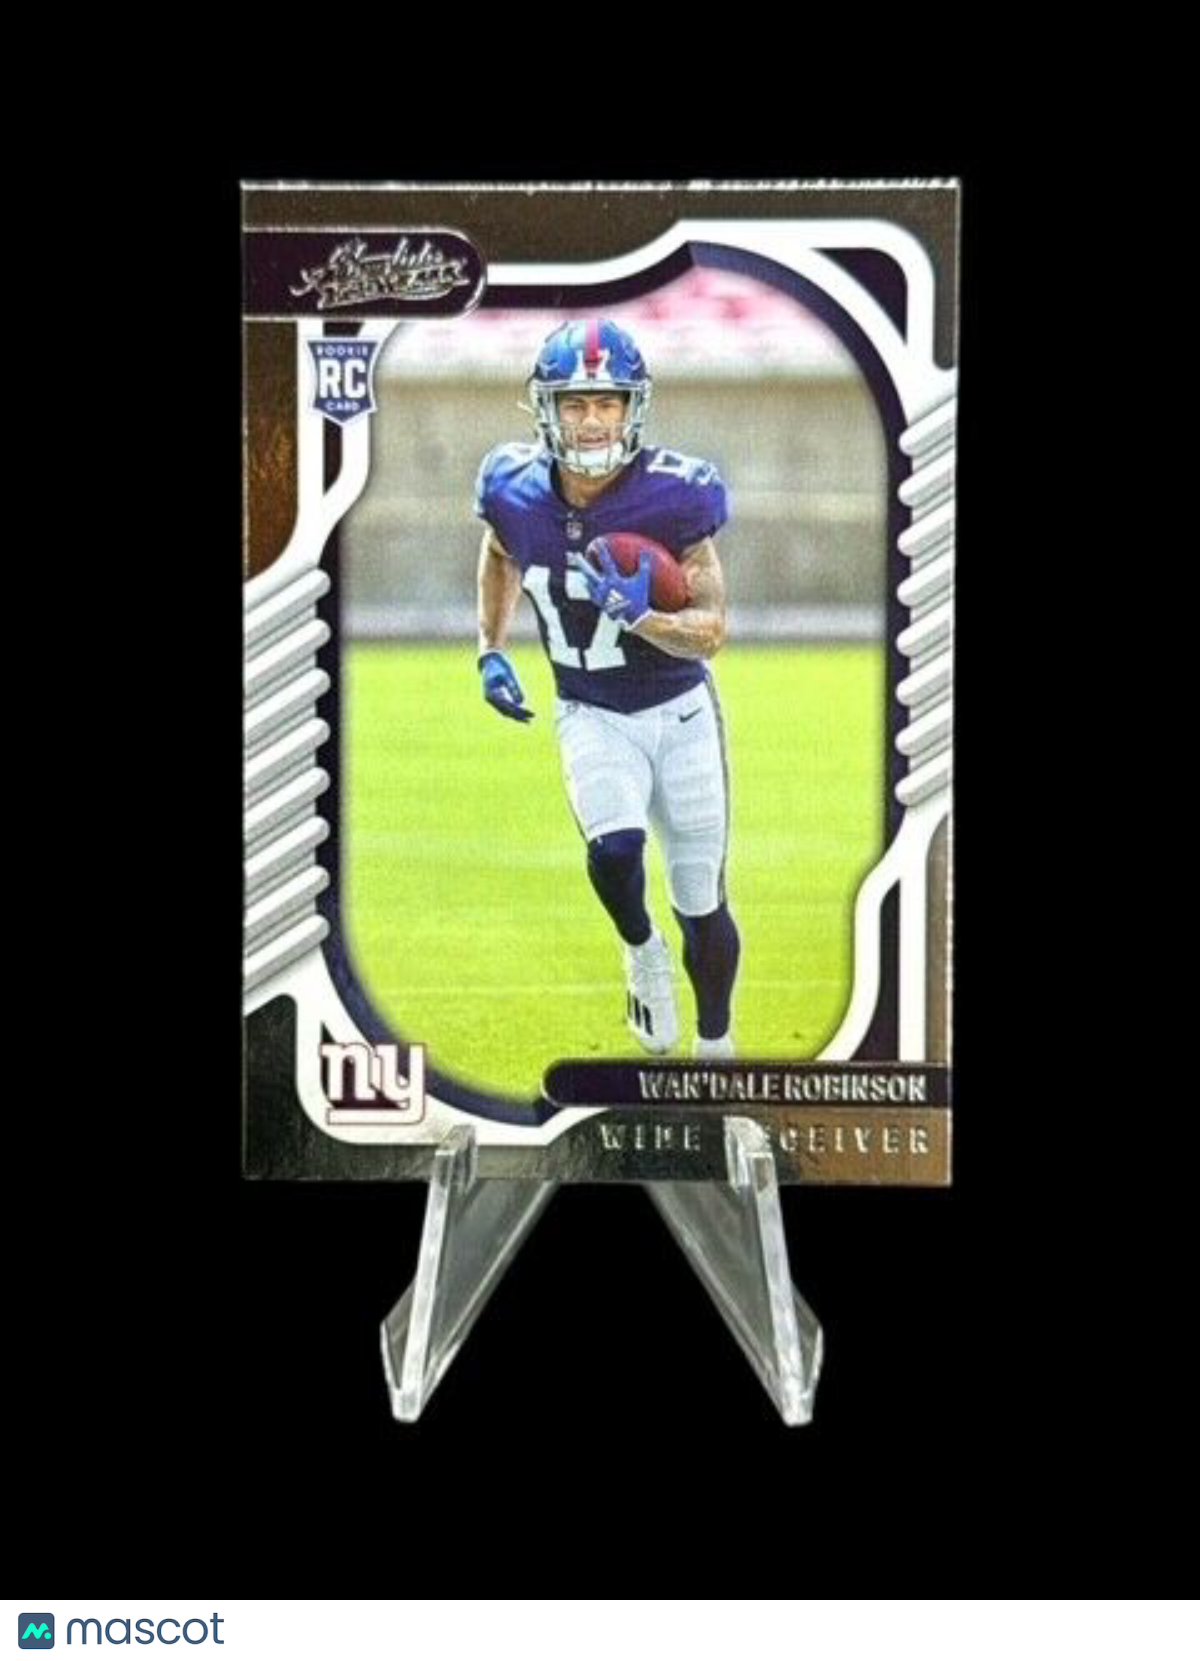 2022 Panini Absolute #120 Wan'Dale Robinson  RC Rookie  Near mint or better